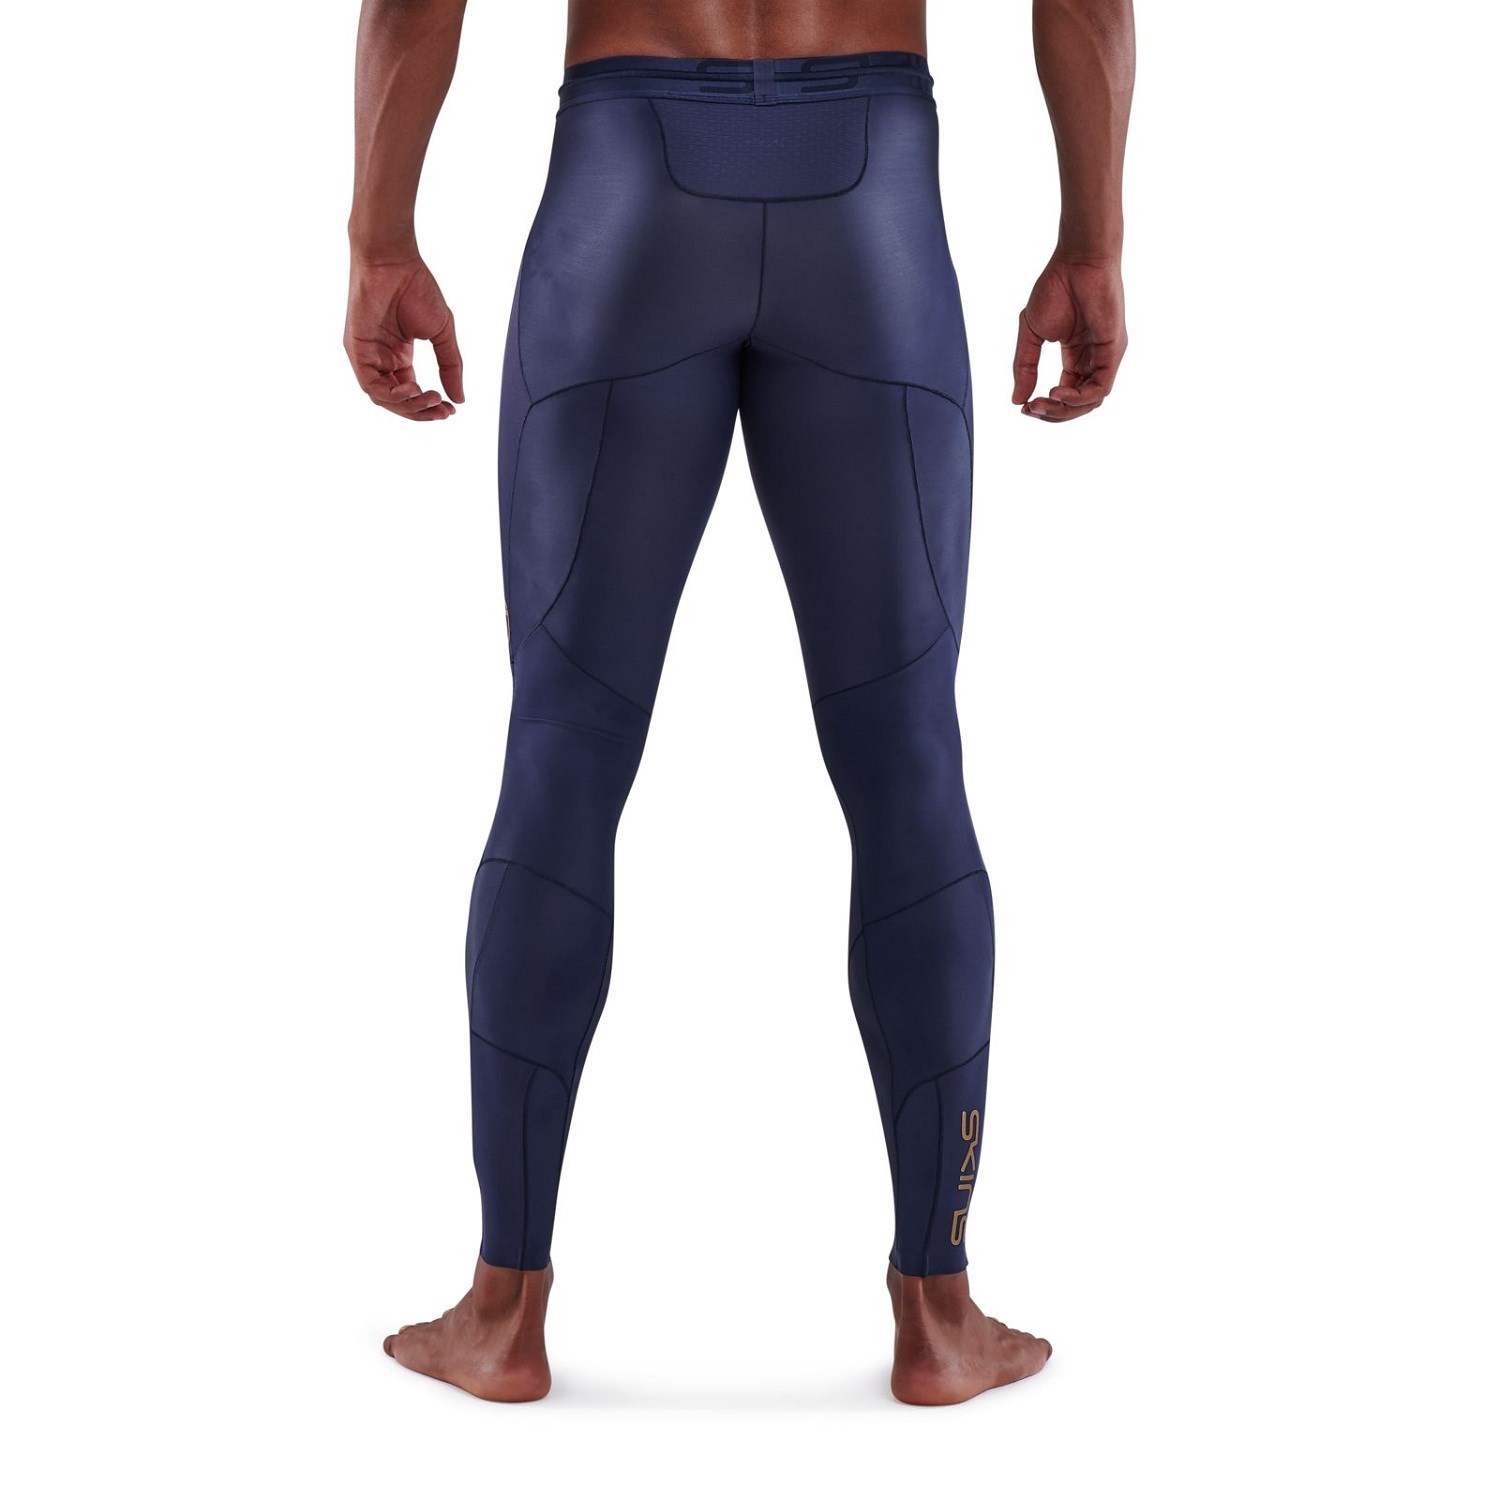 Skins Series-5 Mens Compression Long Tights - Navy Blue | Sportitude